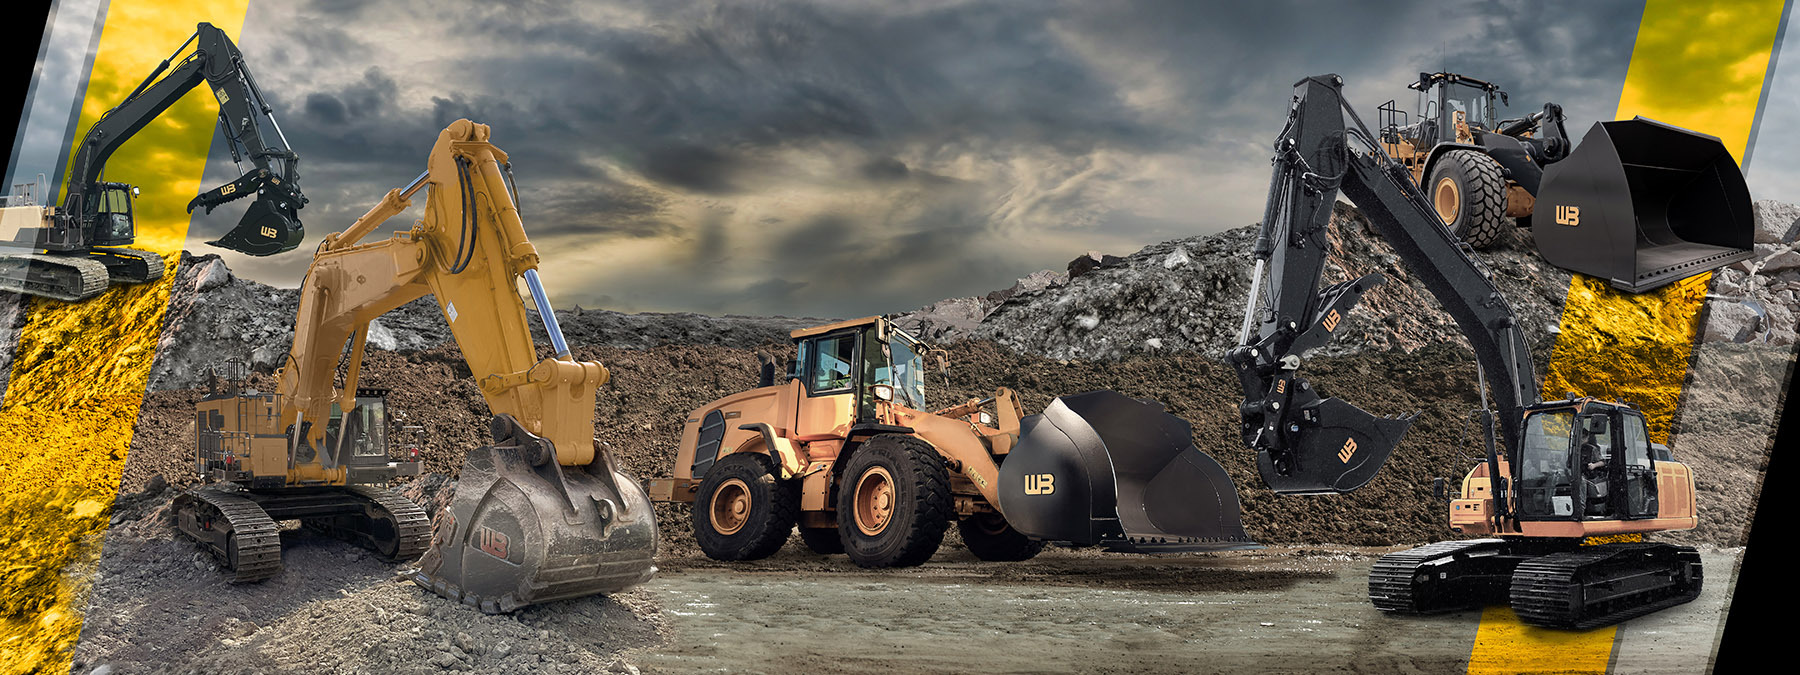 Excavator background for home page